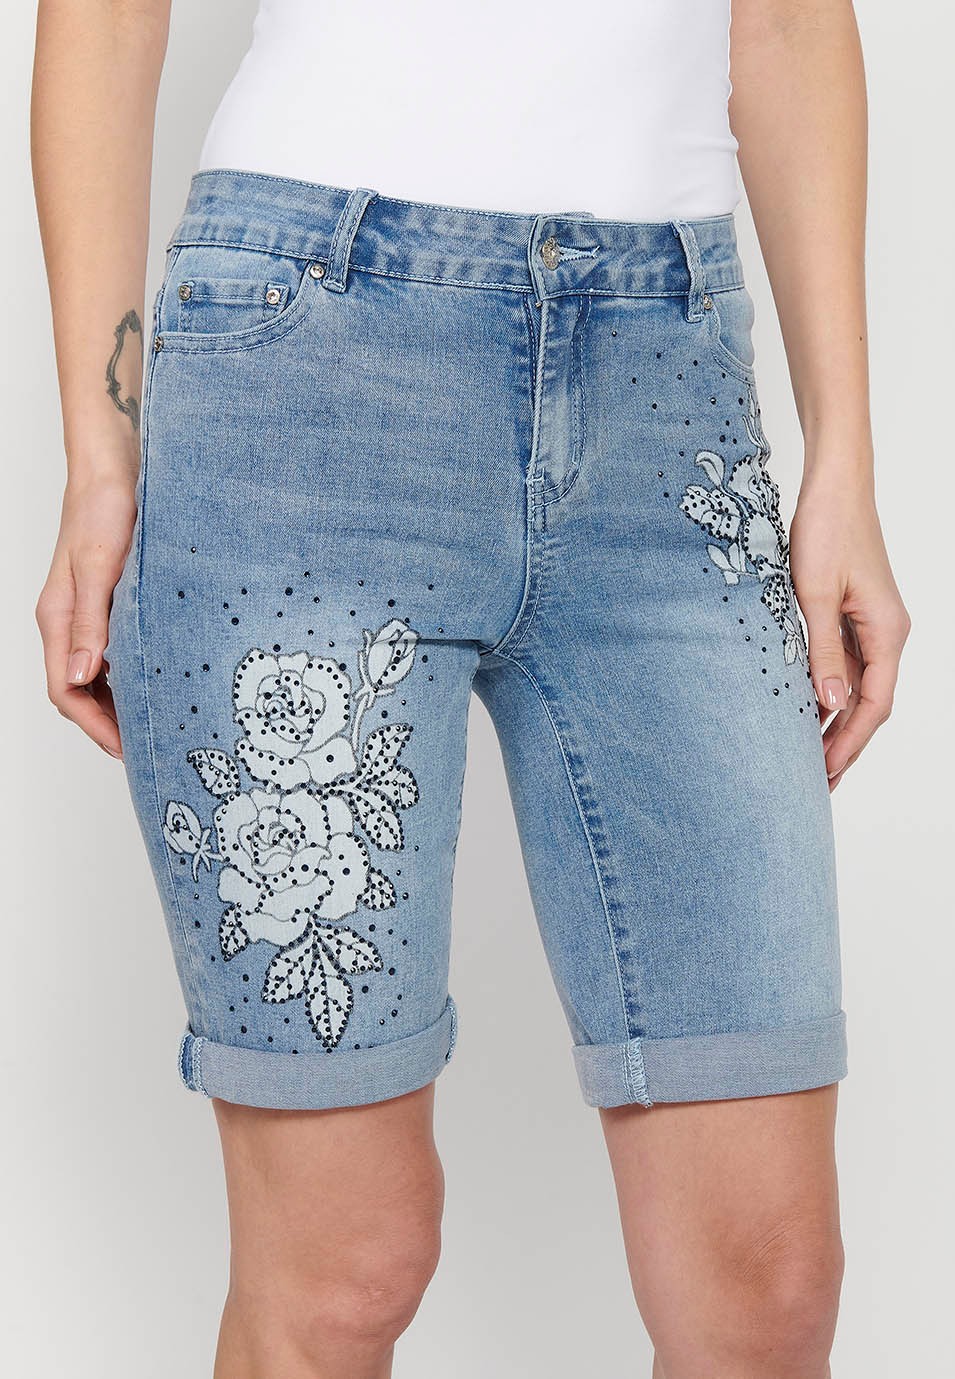 Shorts, floral embroidery, blue color for women